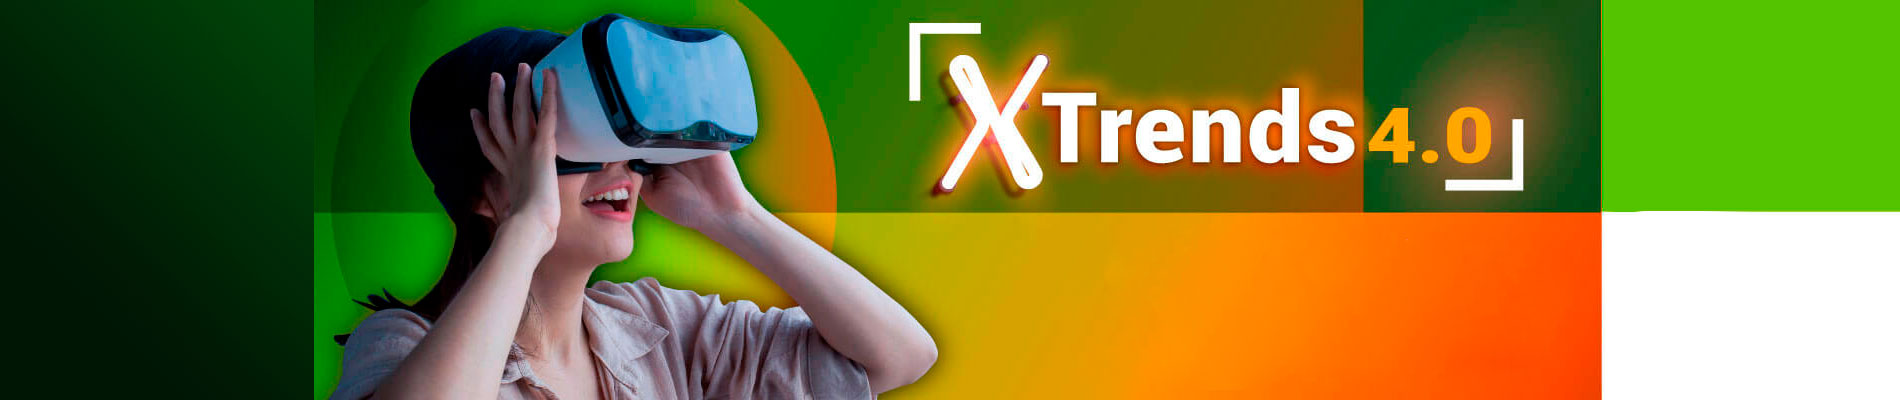 Xtrends